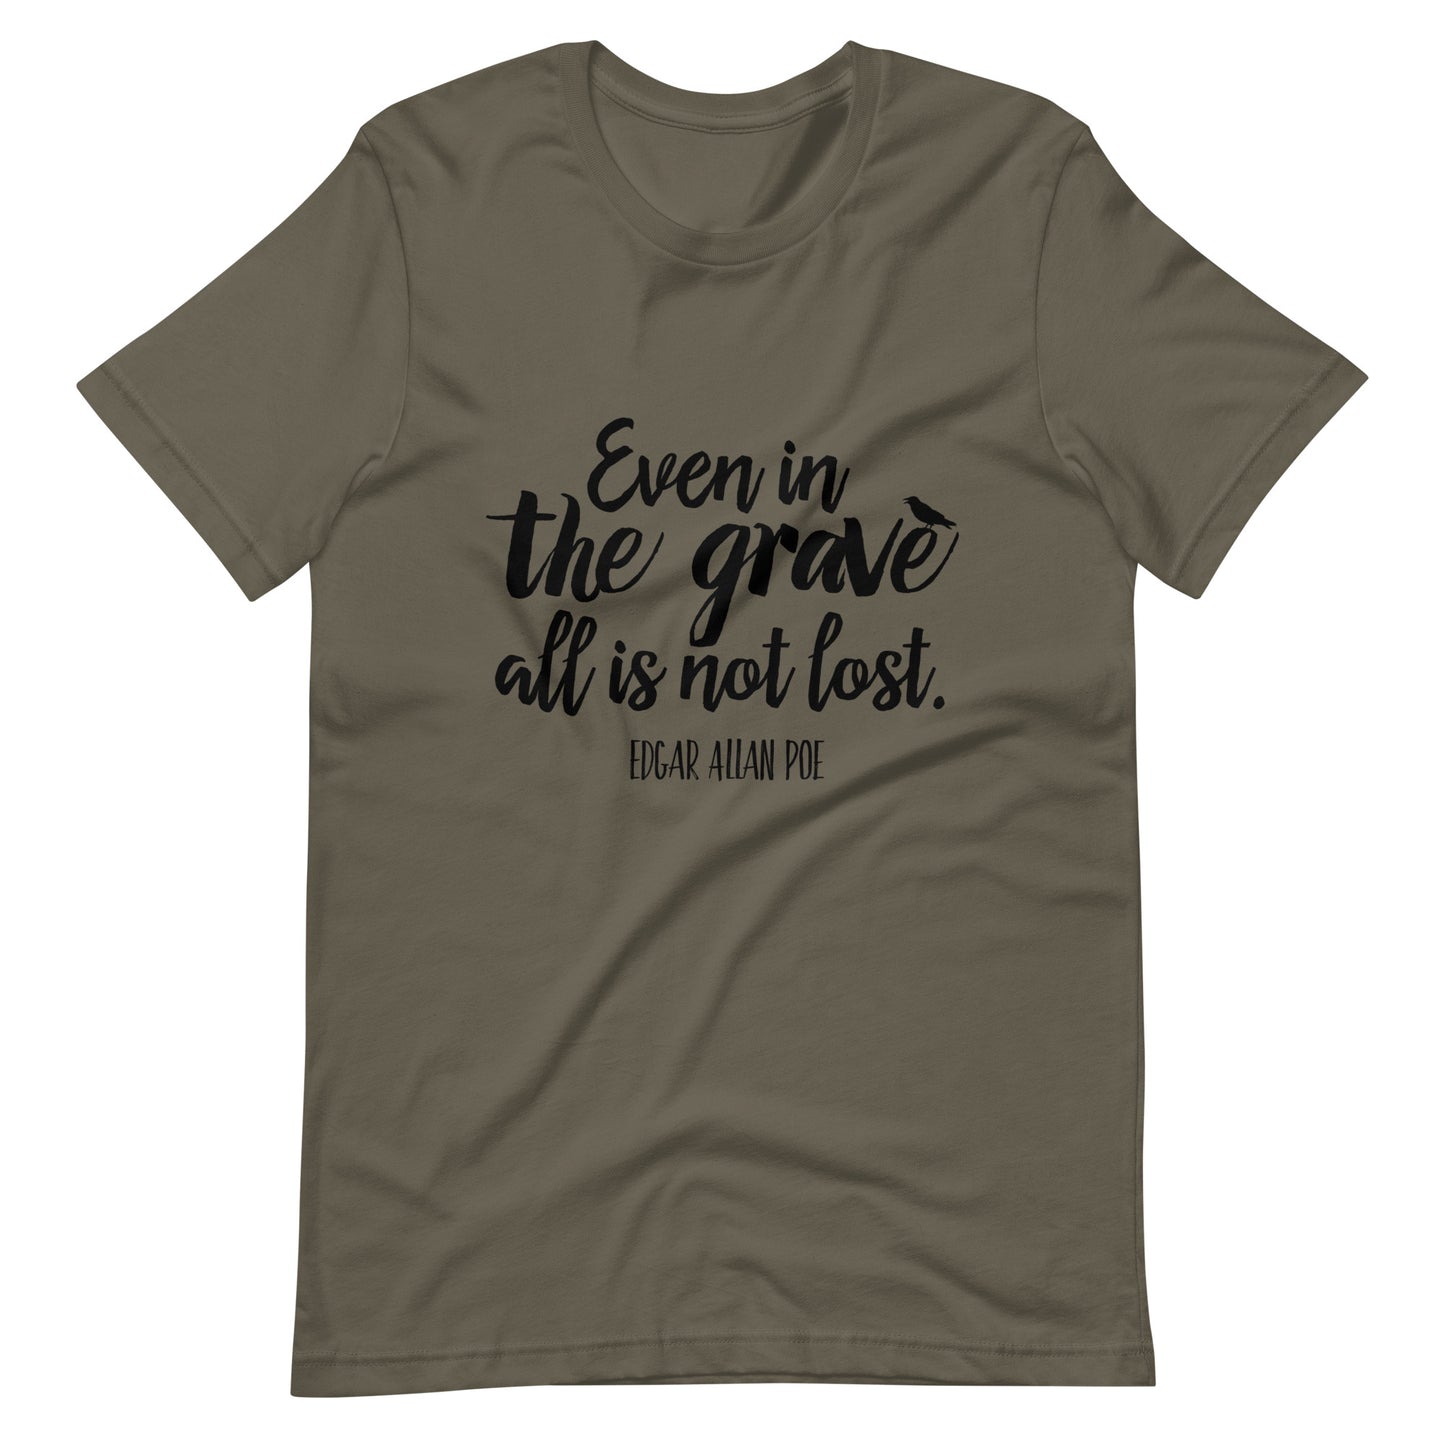 Even in the Grave Edgar Allan Poe Quote - Men's t-shirt - Army Front